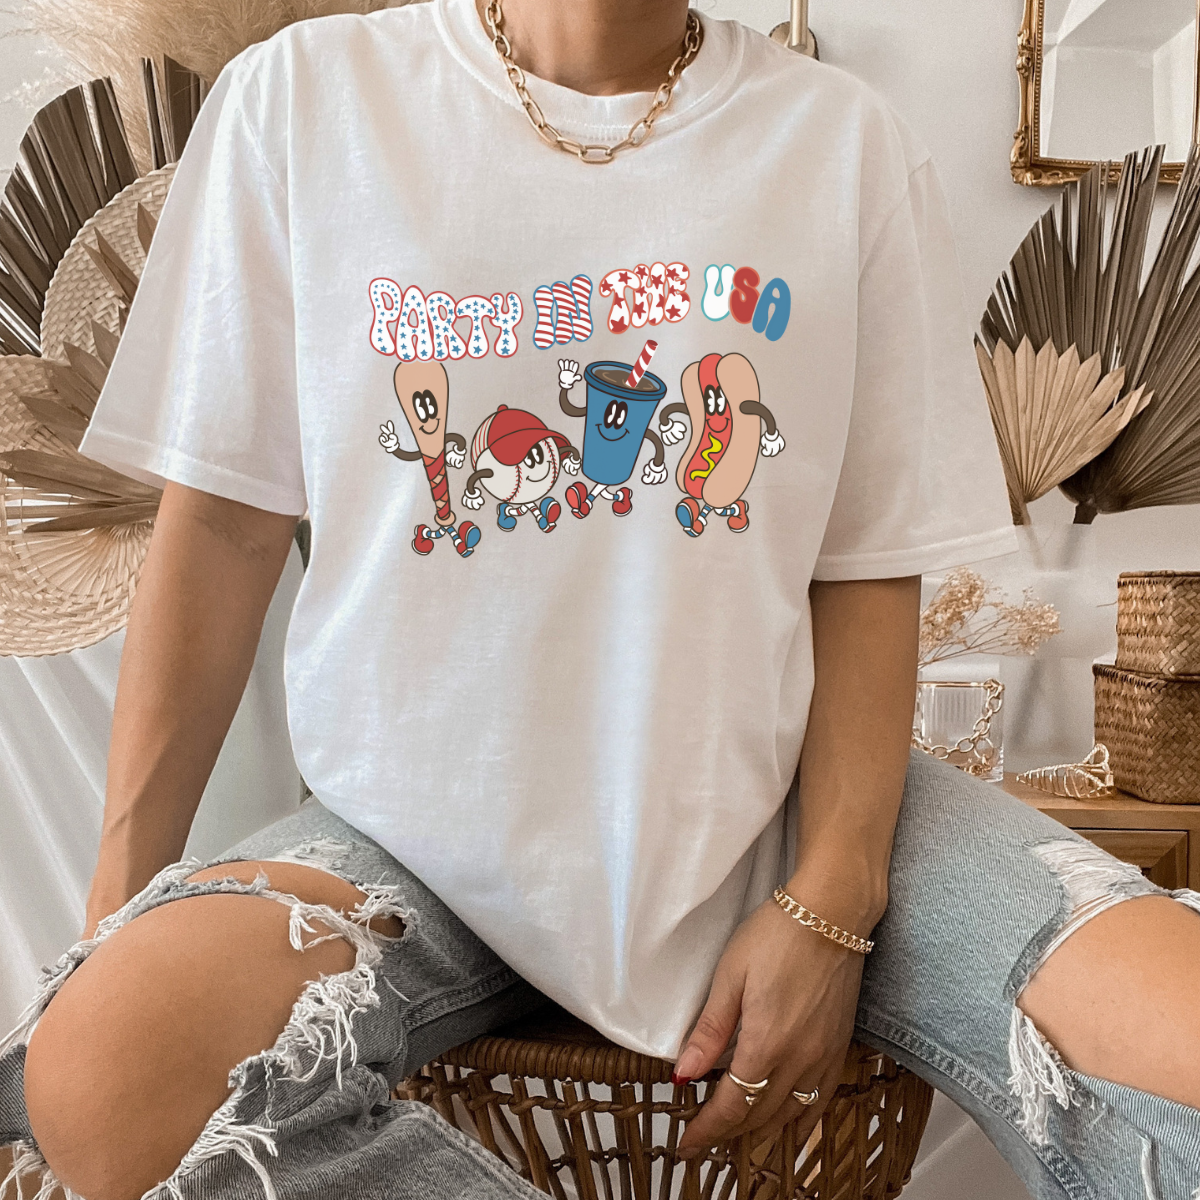 Party in the USA Graphic Printed Apparel